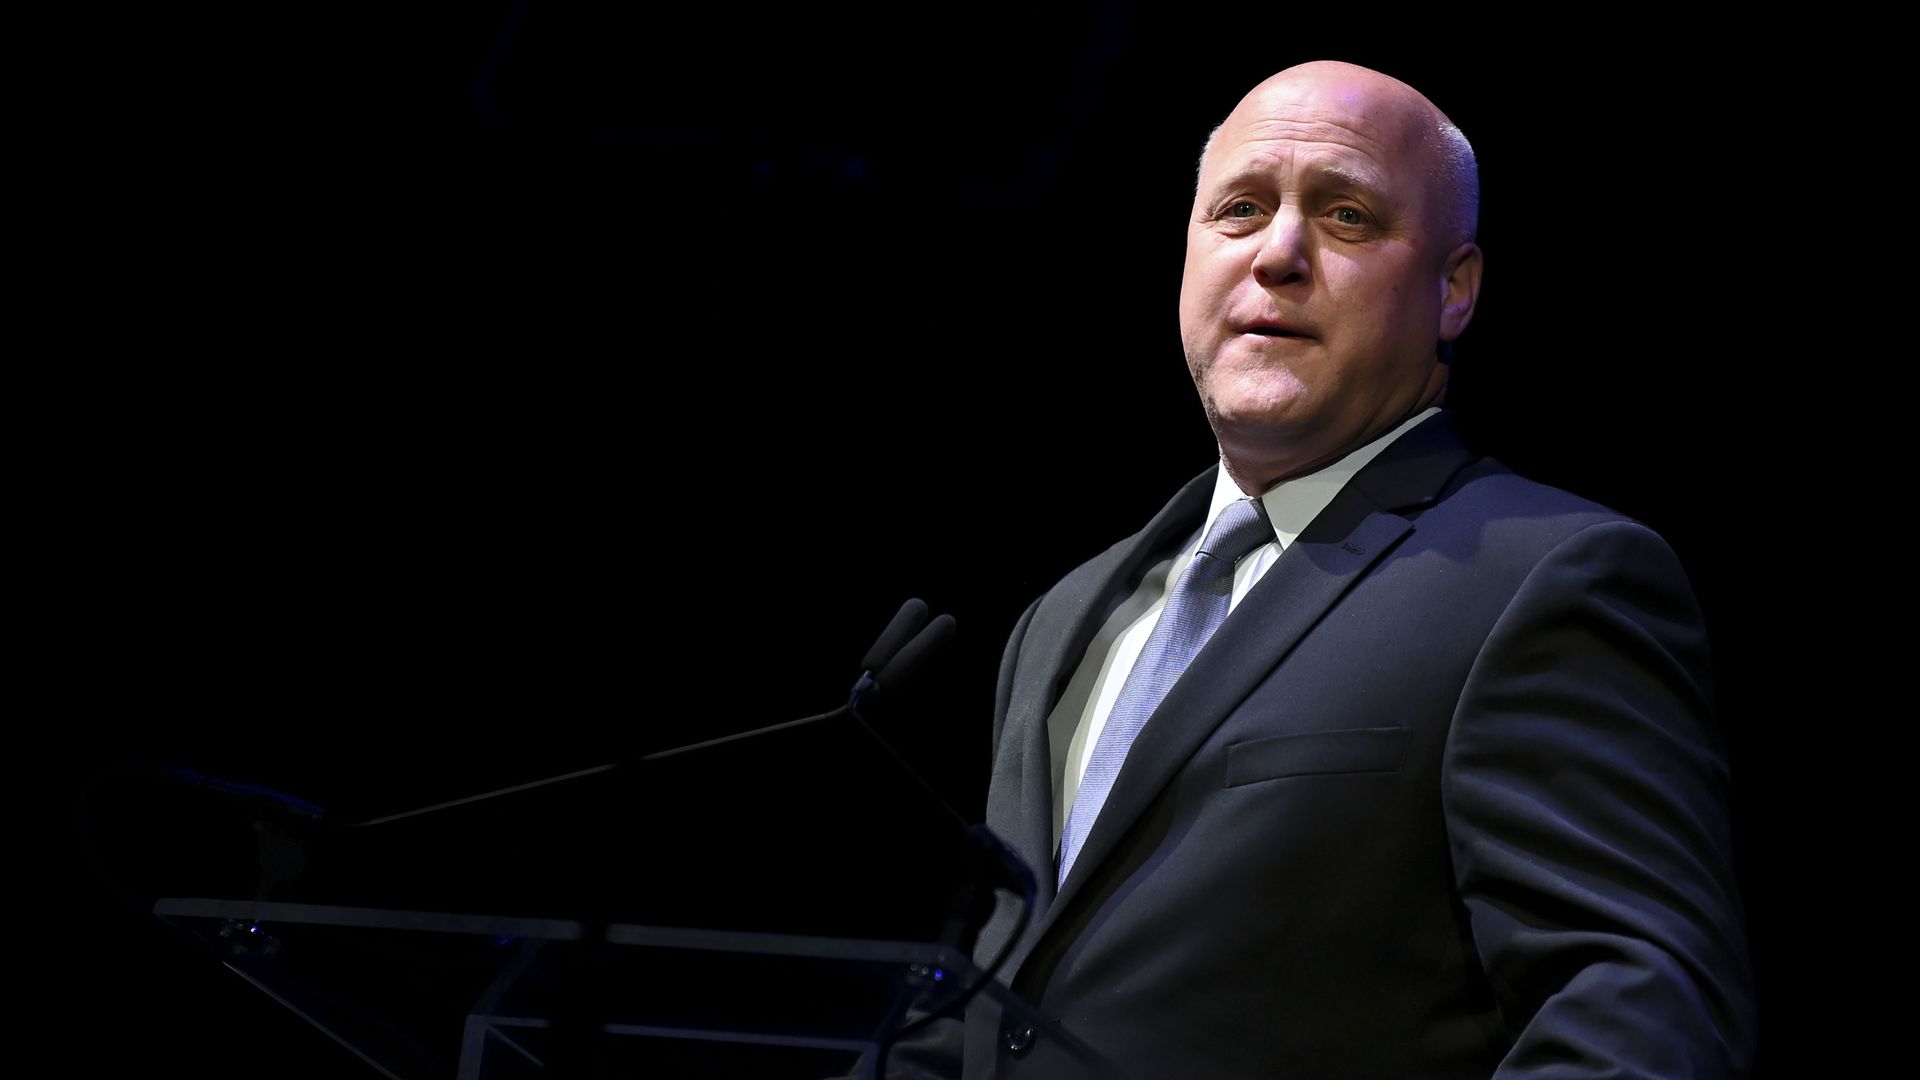 Former Mayor of New Orleans Mitch Landrieu delivers remarks at a Kennedy Center Eisenhower Theater event on December 3, 2019 in Washington, DC. 